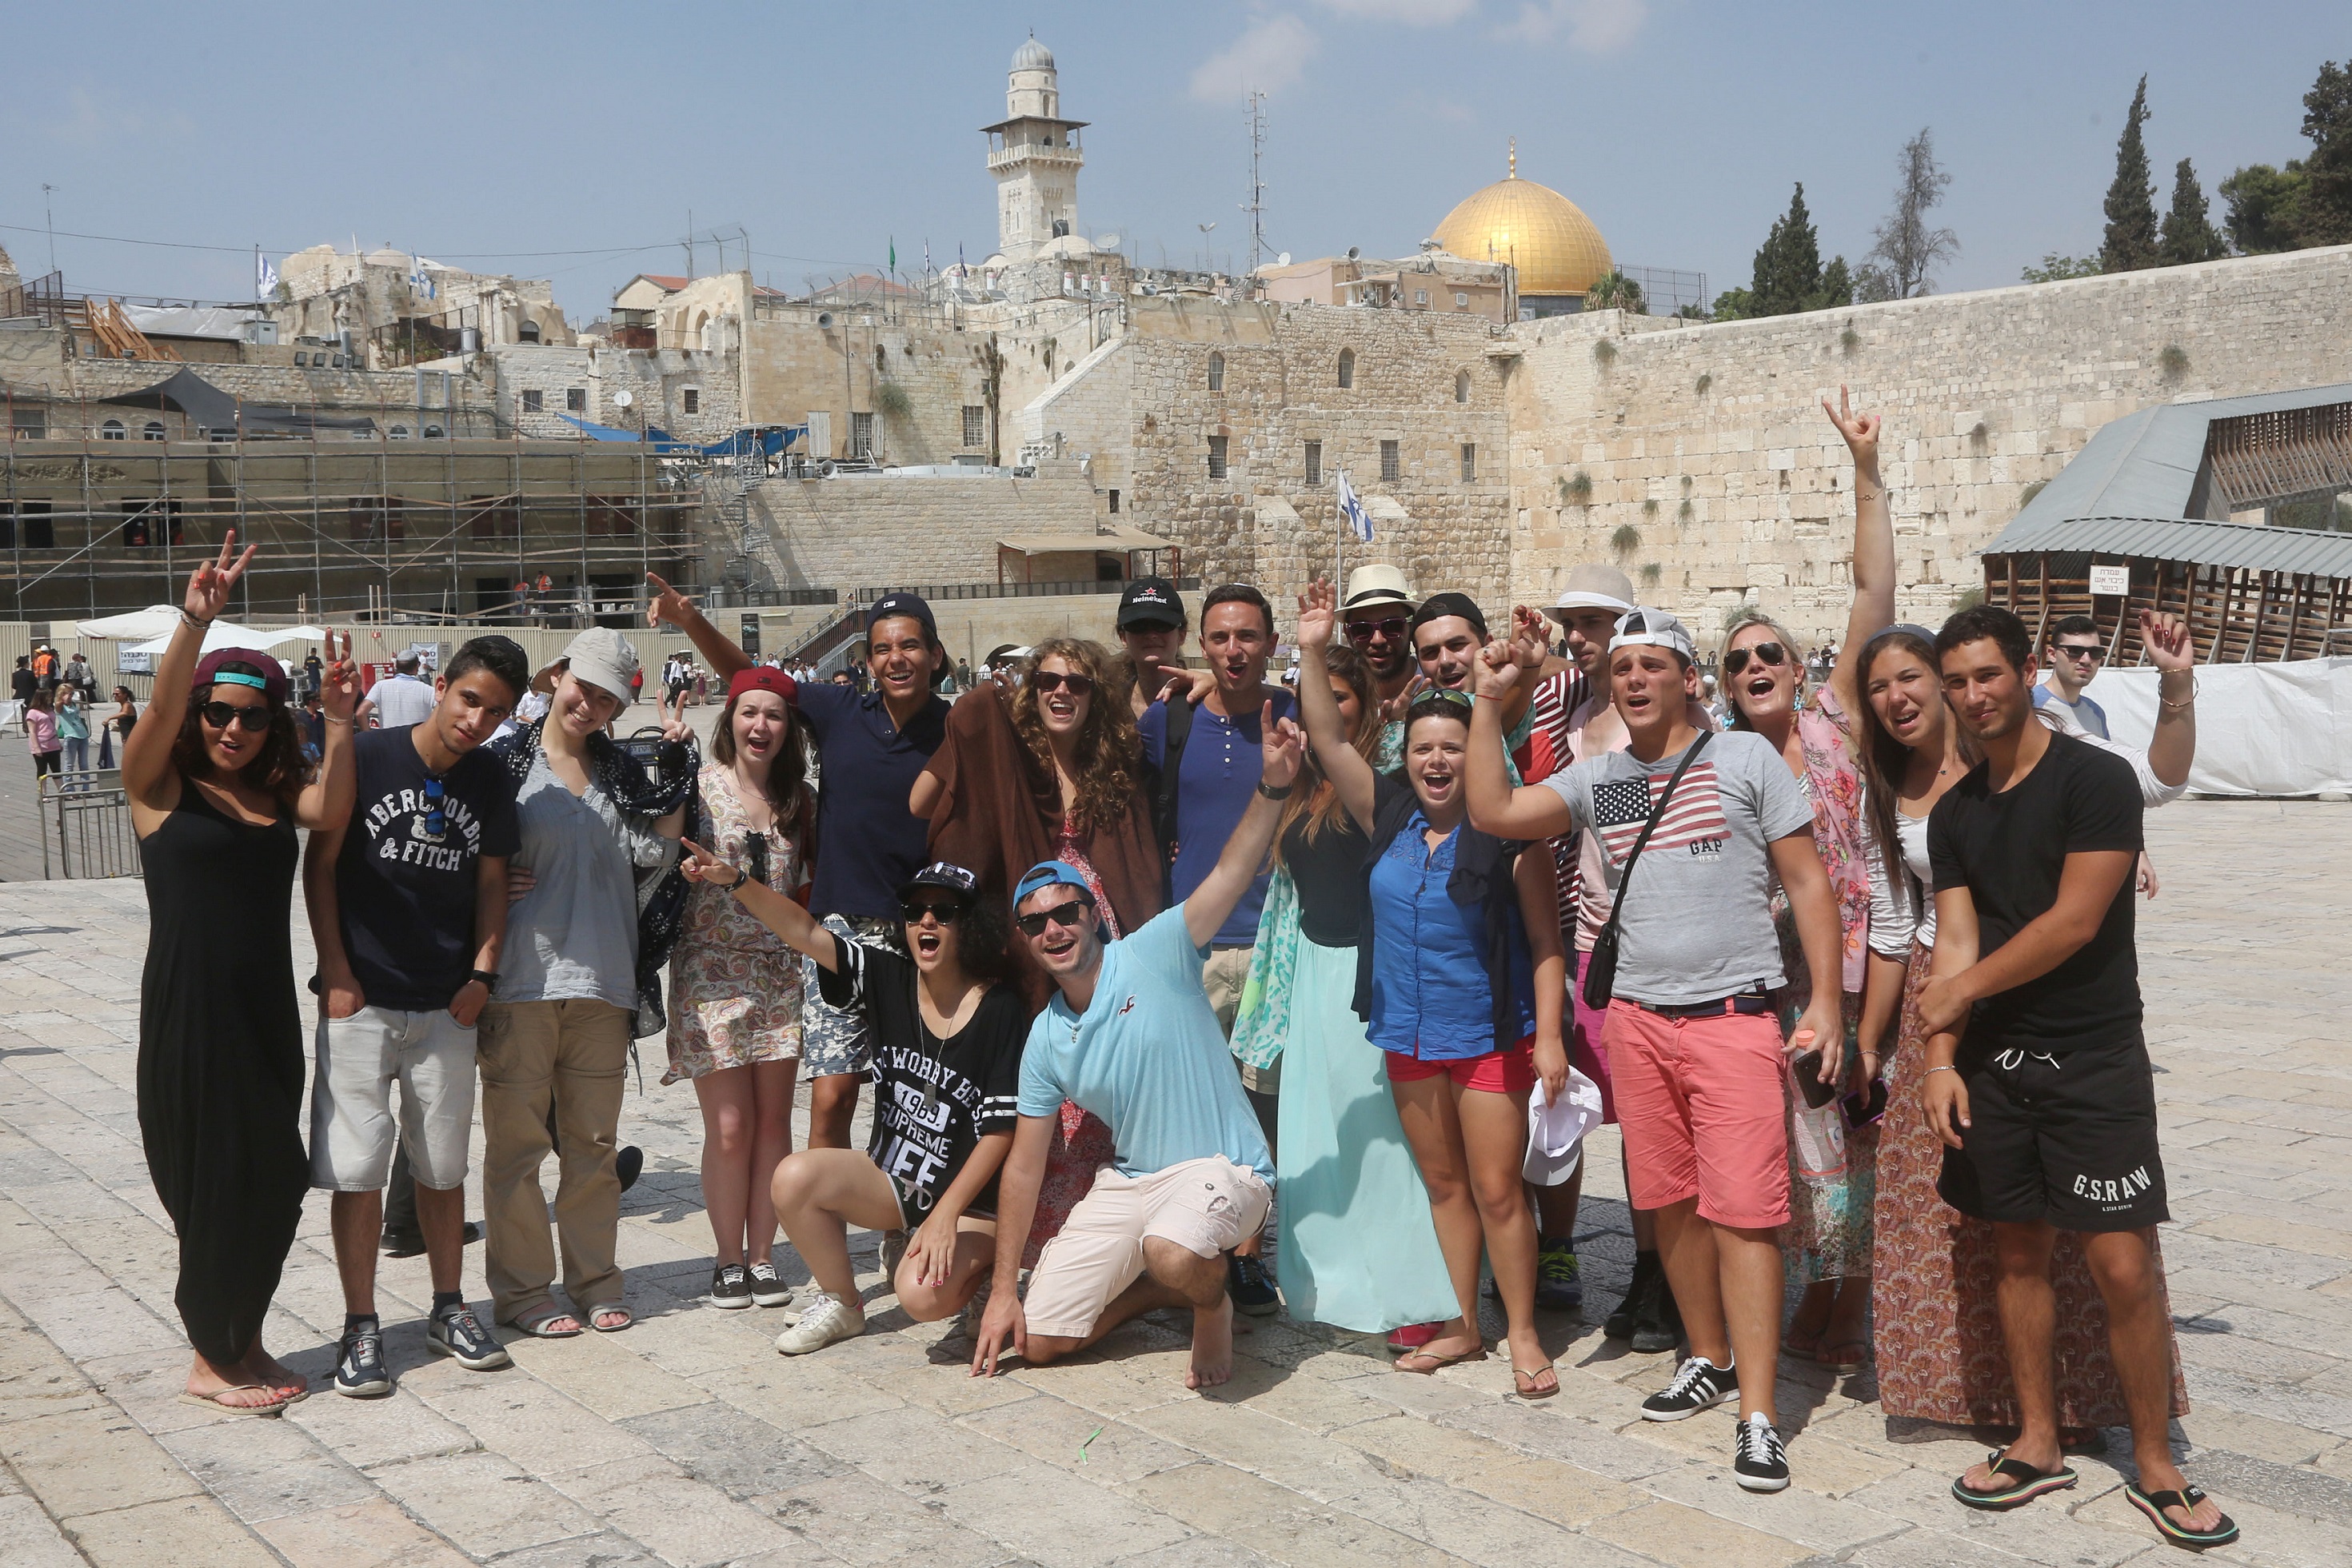 Taglit-Birthright Israel participants visit at the Western Wall in the Old City of Jerusalem on August 18, 2014. (Flash90)